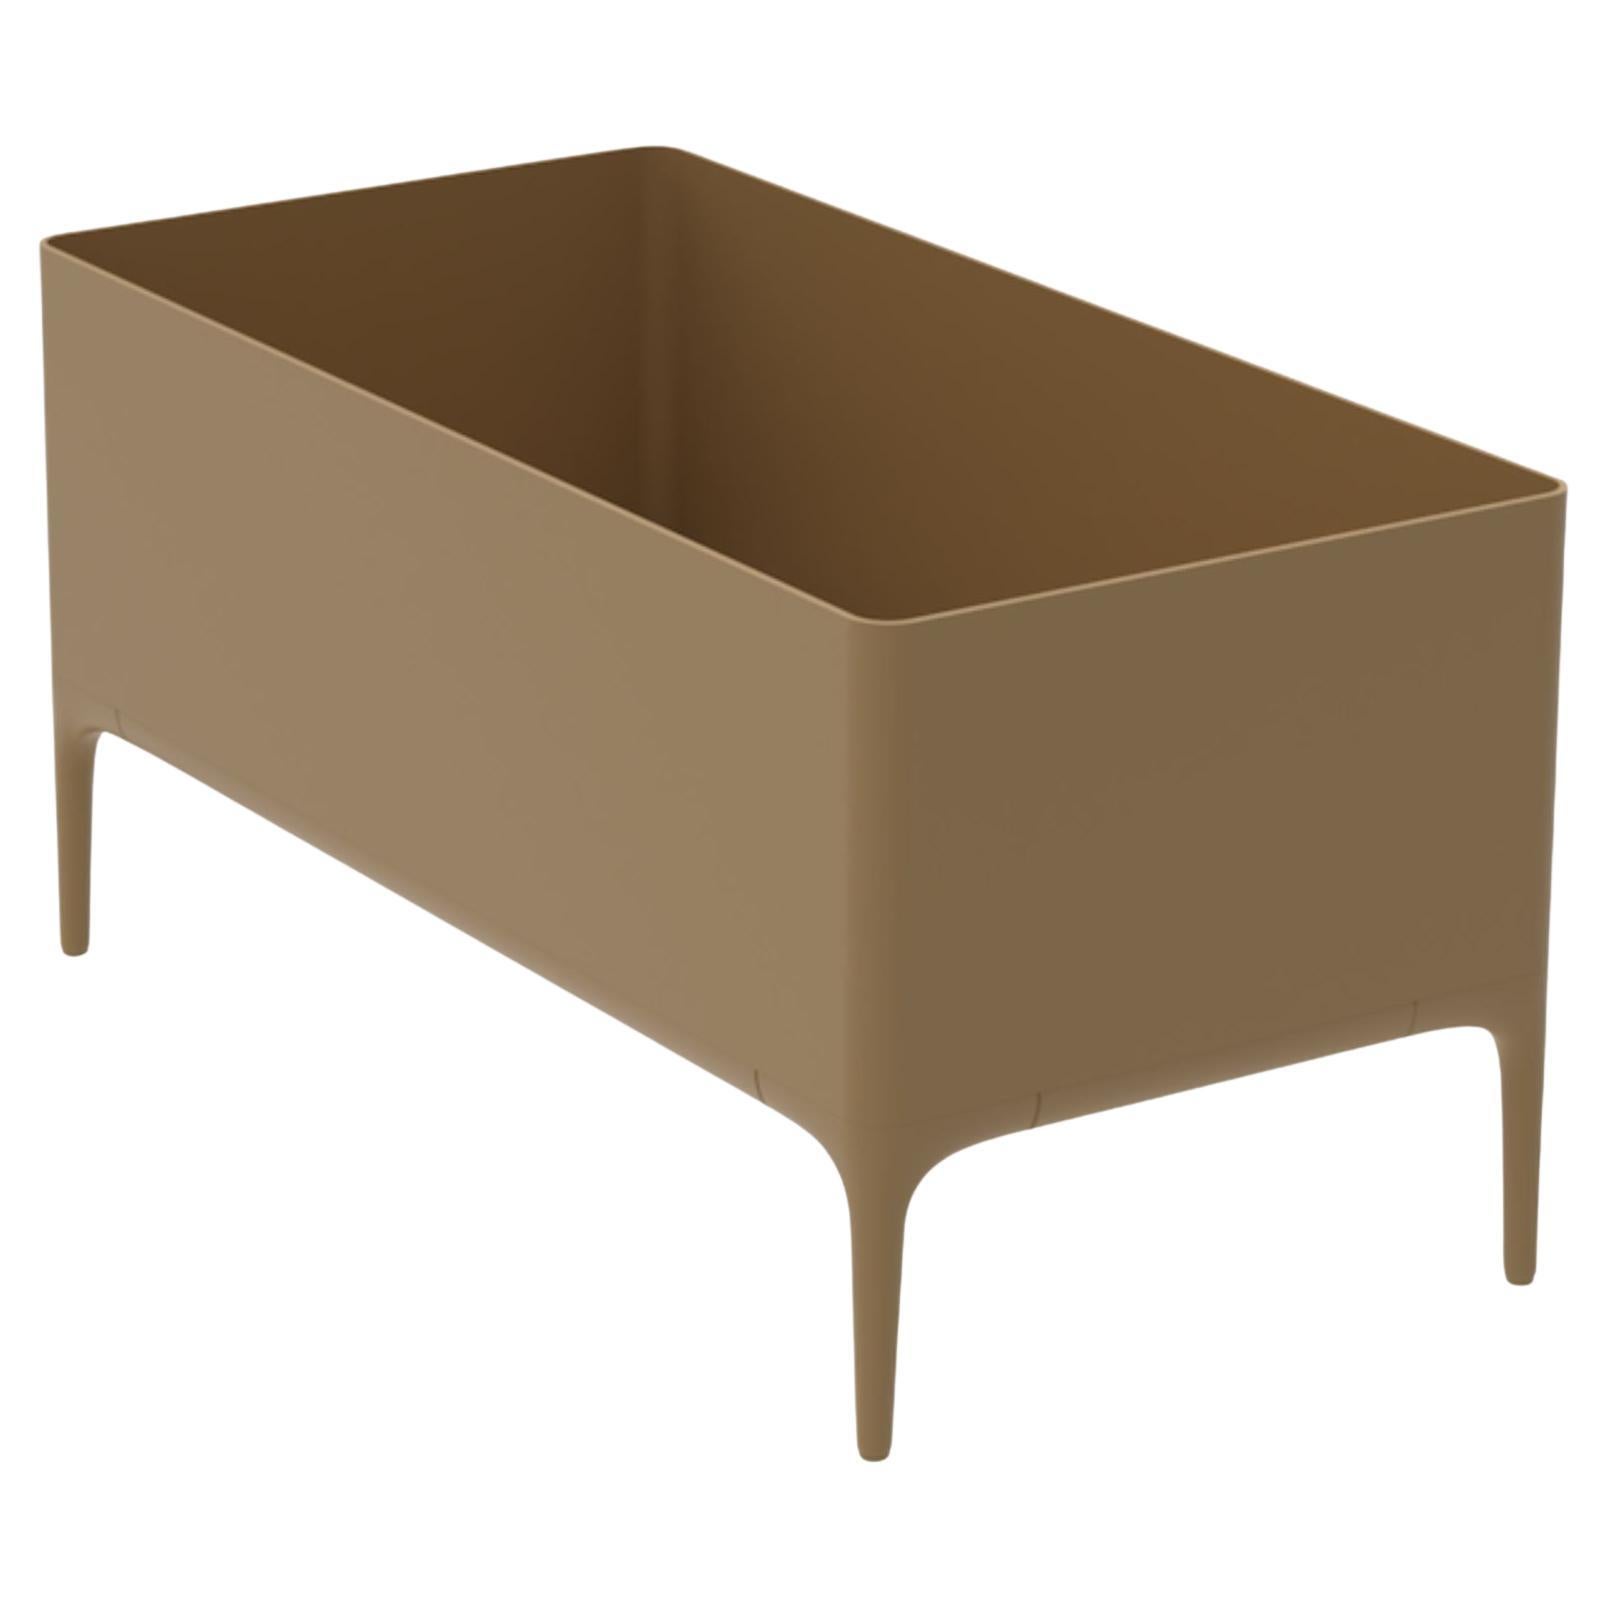 Xaloc Gold Planter by Mowee For Sale